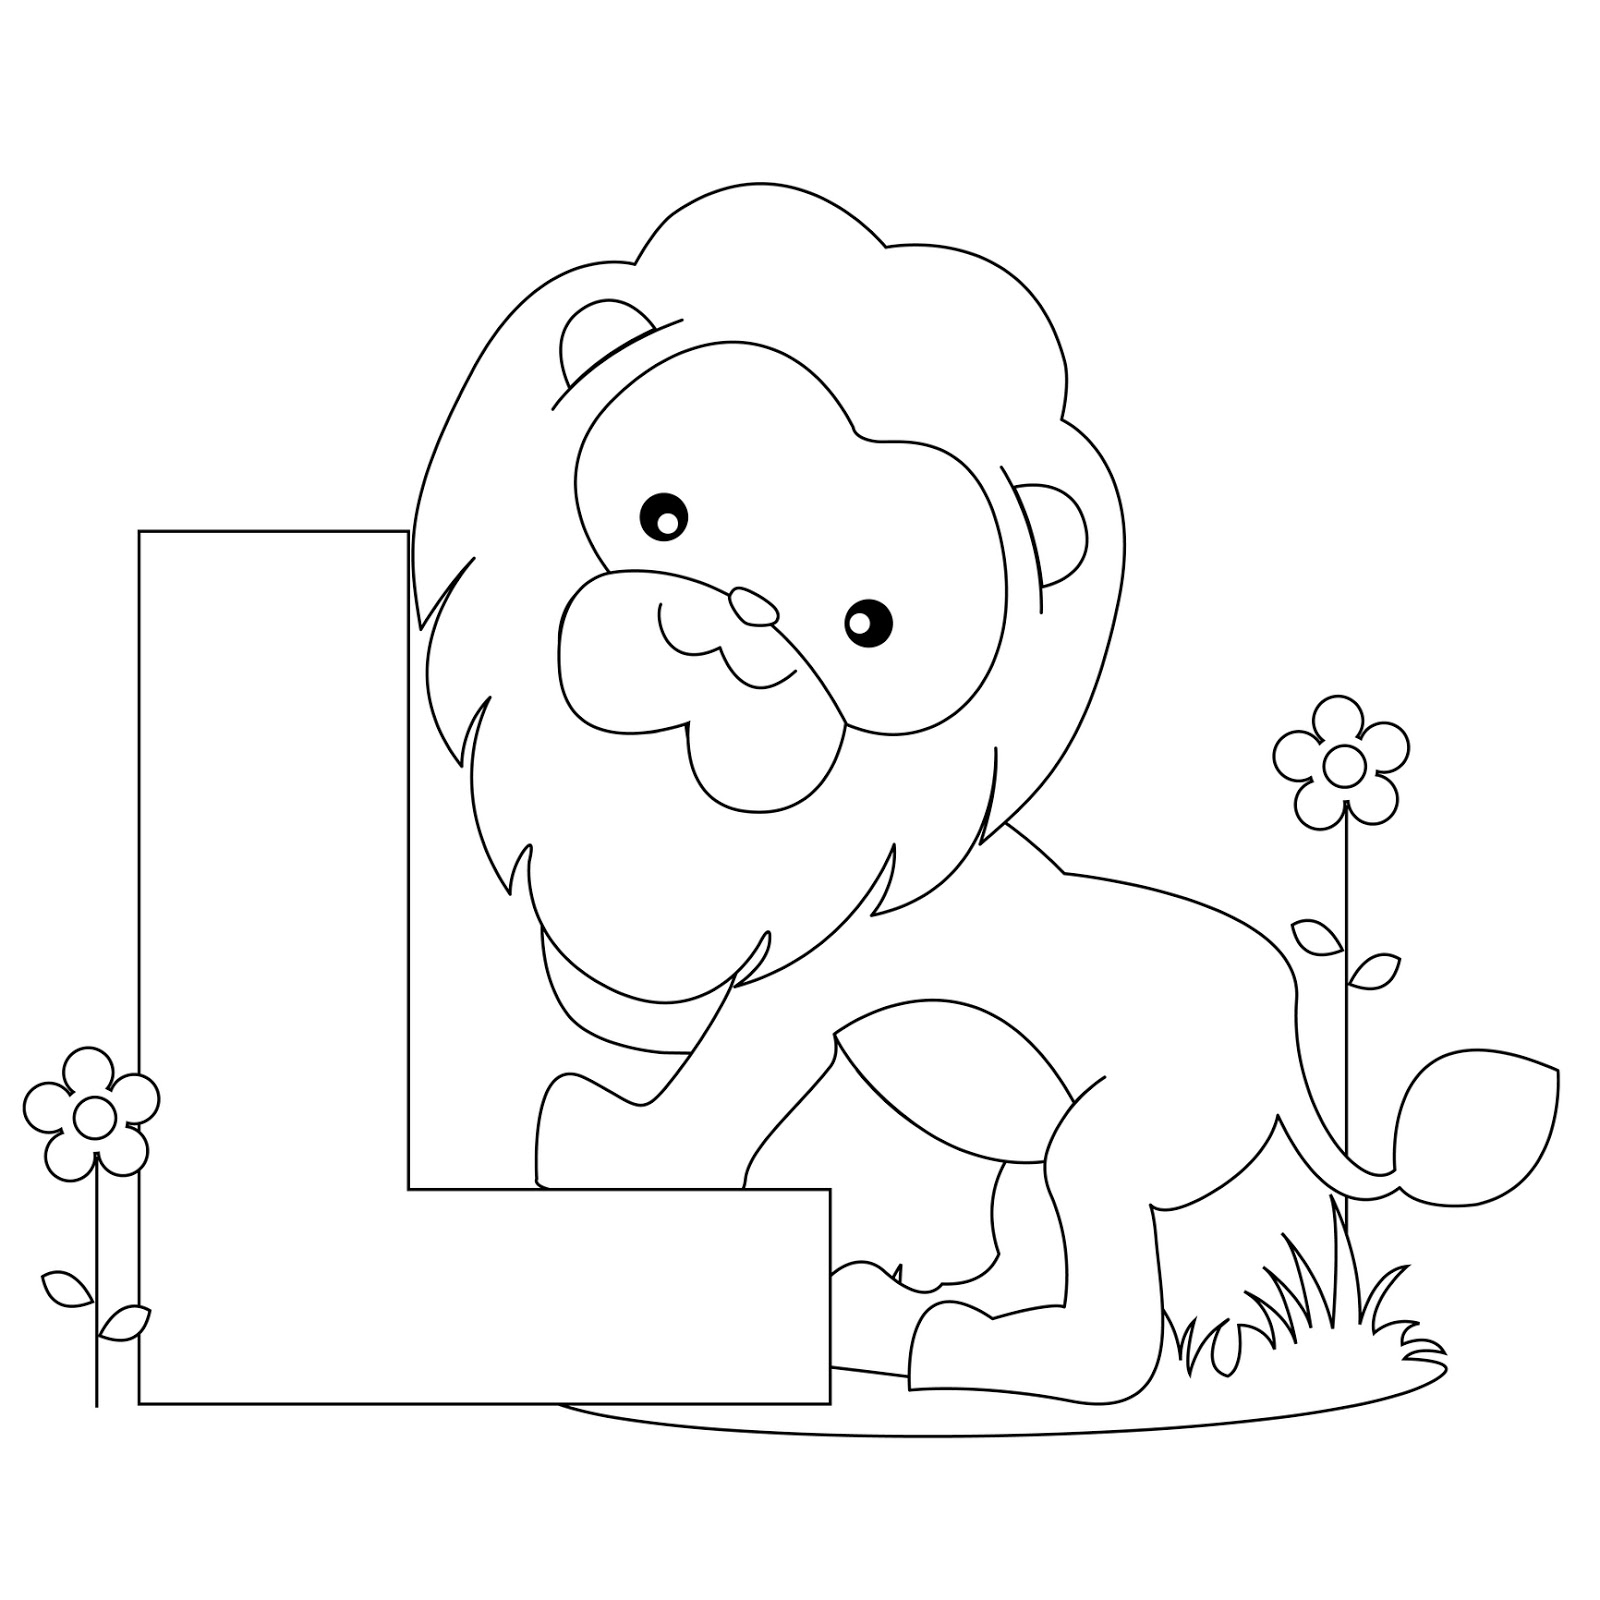 free-printable-abc-coloring-pages-at-getcolorings-free-printable